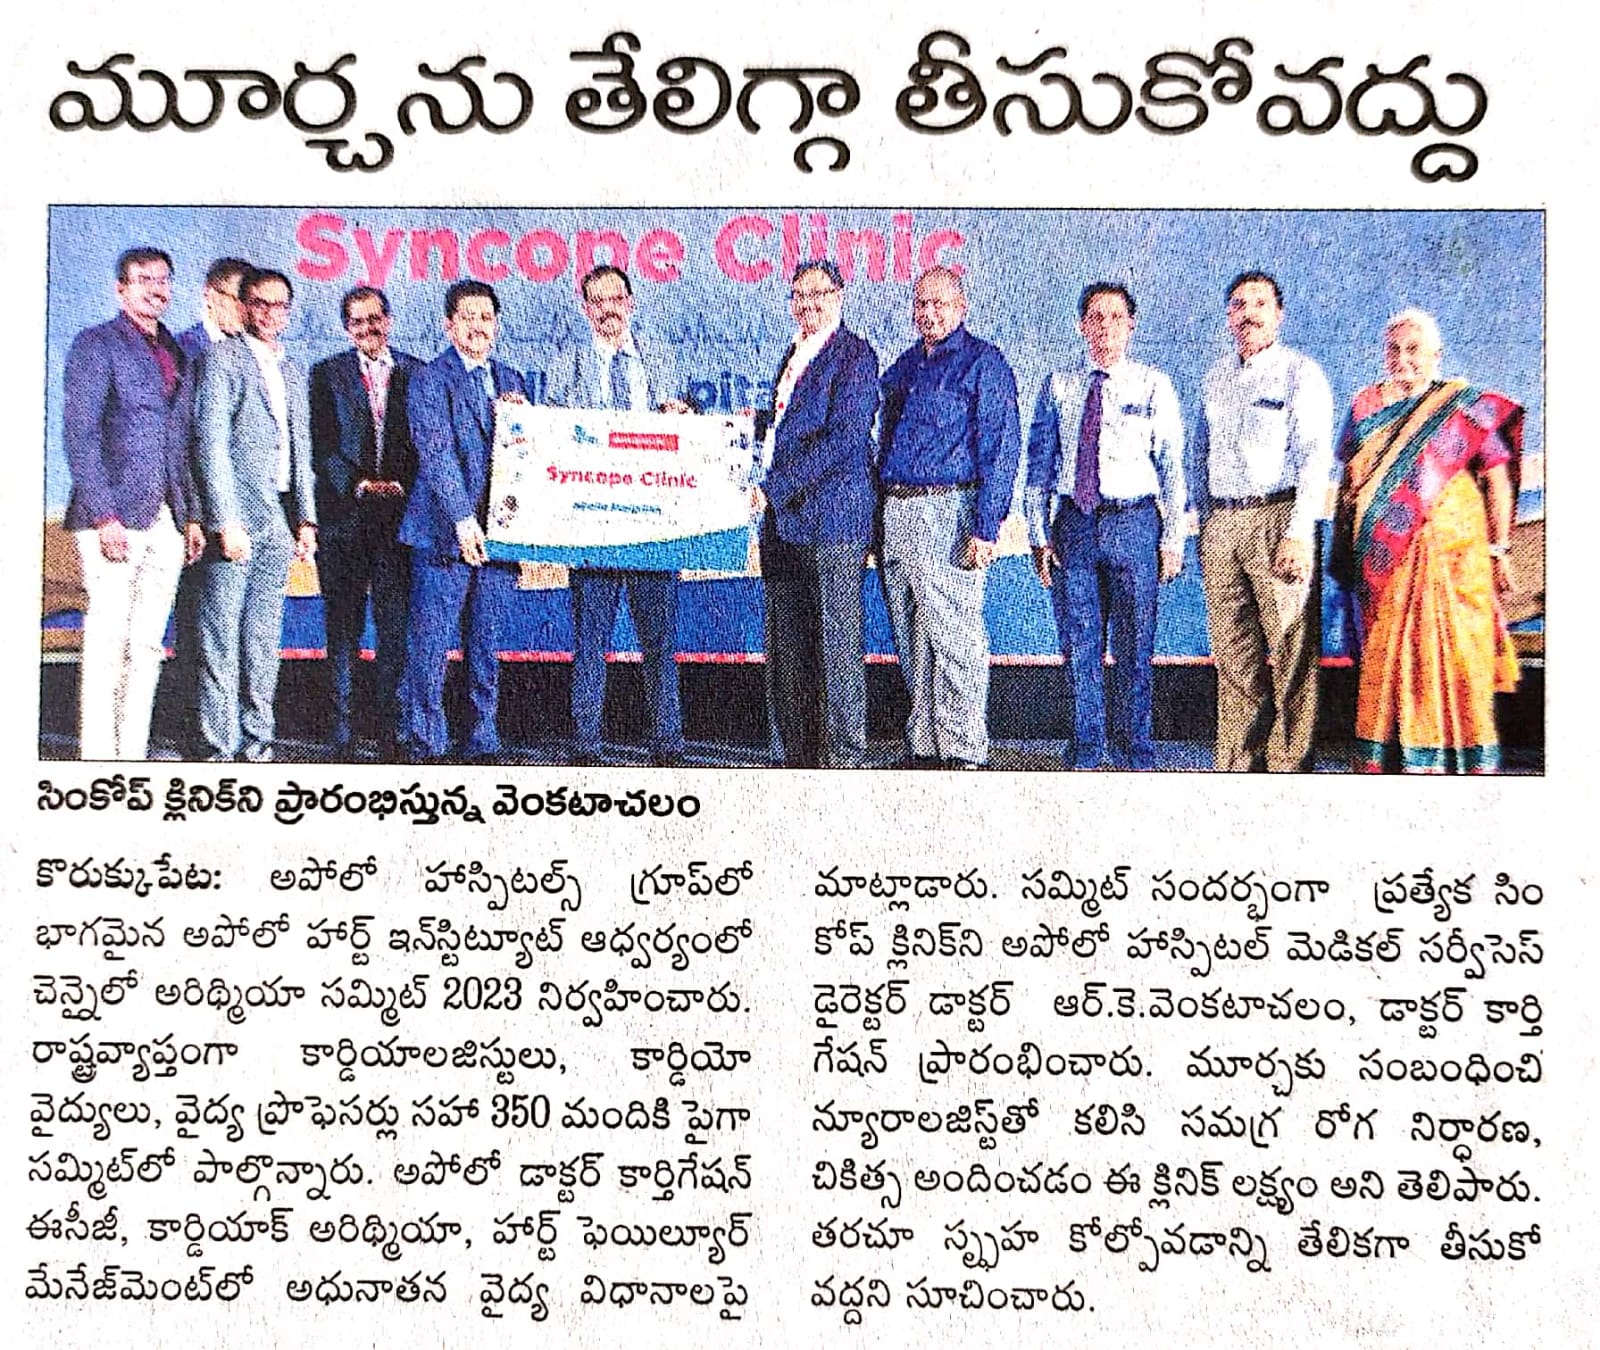 News article in Kanada about the launch of a dedicated Syncope clinic by Apollo hospitals at the arrhythmia summit 2023.